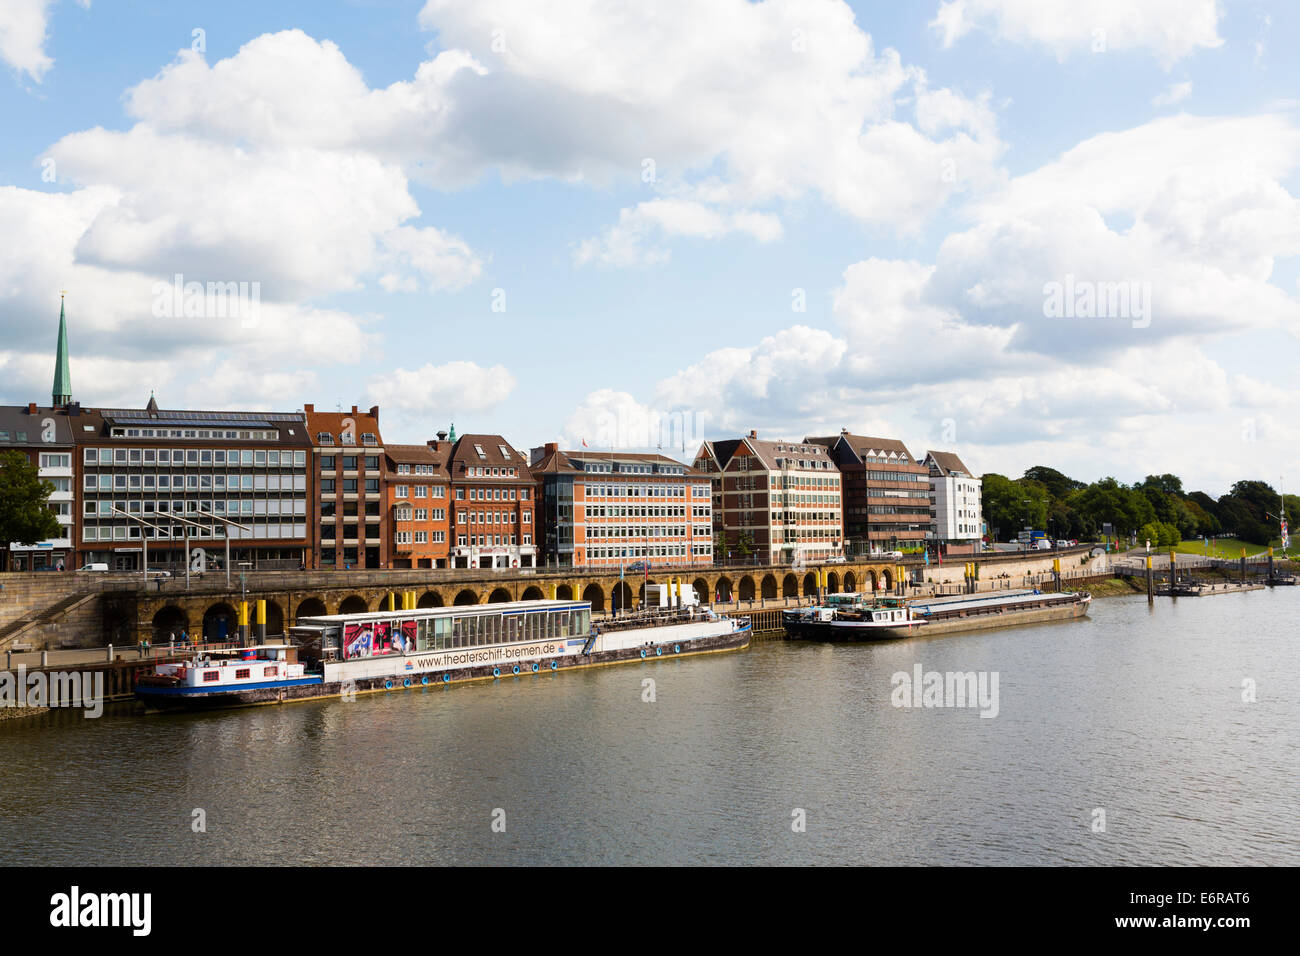 Theatre ship moored at the Schlachte embankment, Bremen, Germany Stock Photo